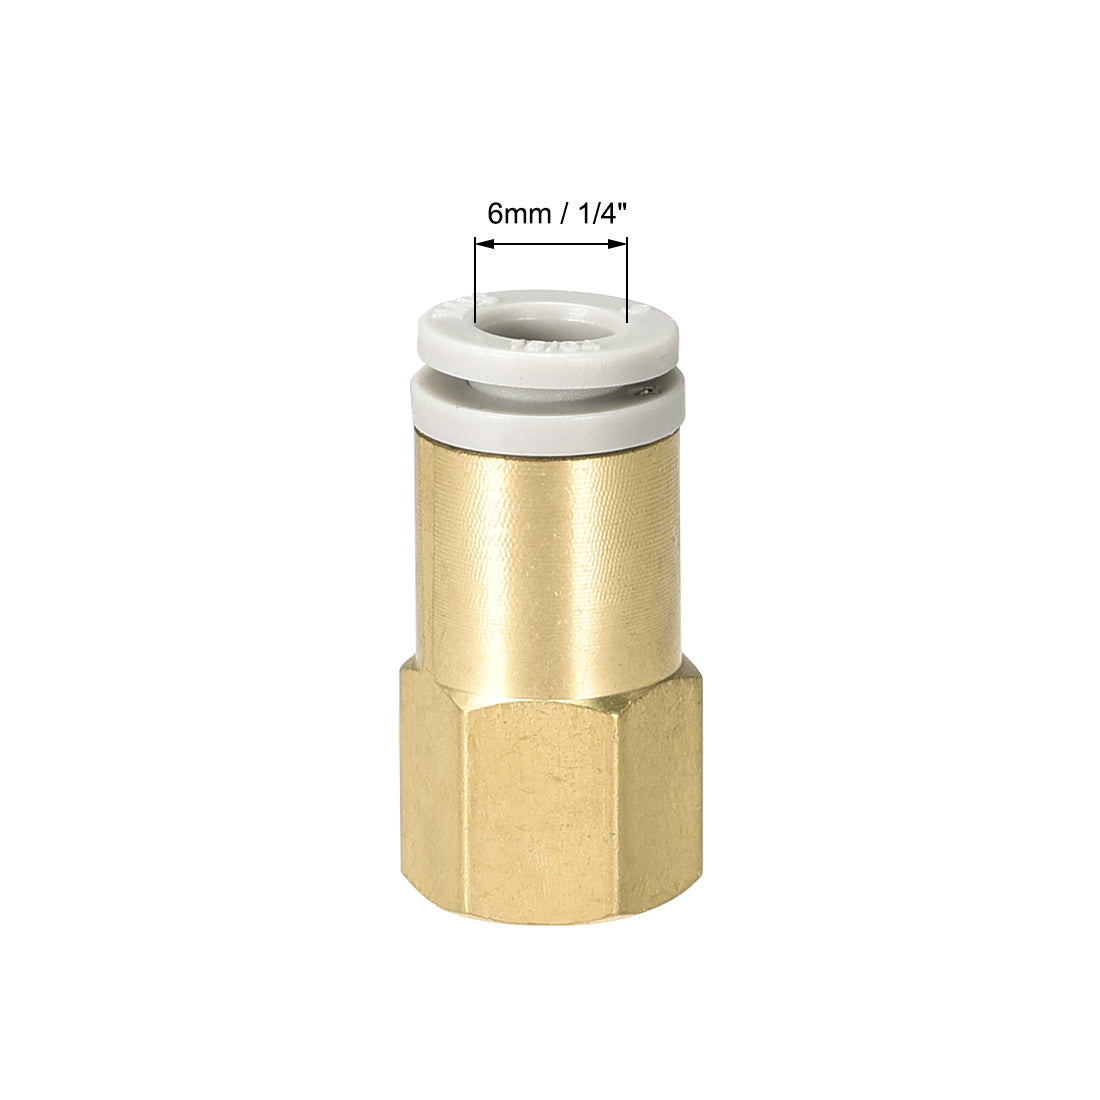 uxcell Uxcell Push to Connect Tube Fittings 6mm Tube OD x 1/8 PT Female Golden Tone 2Pcs